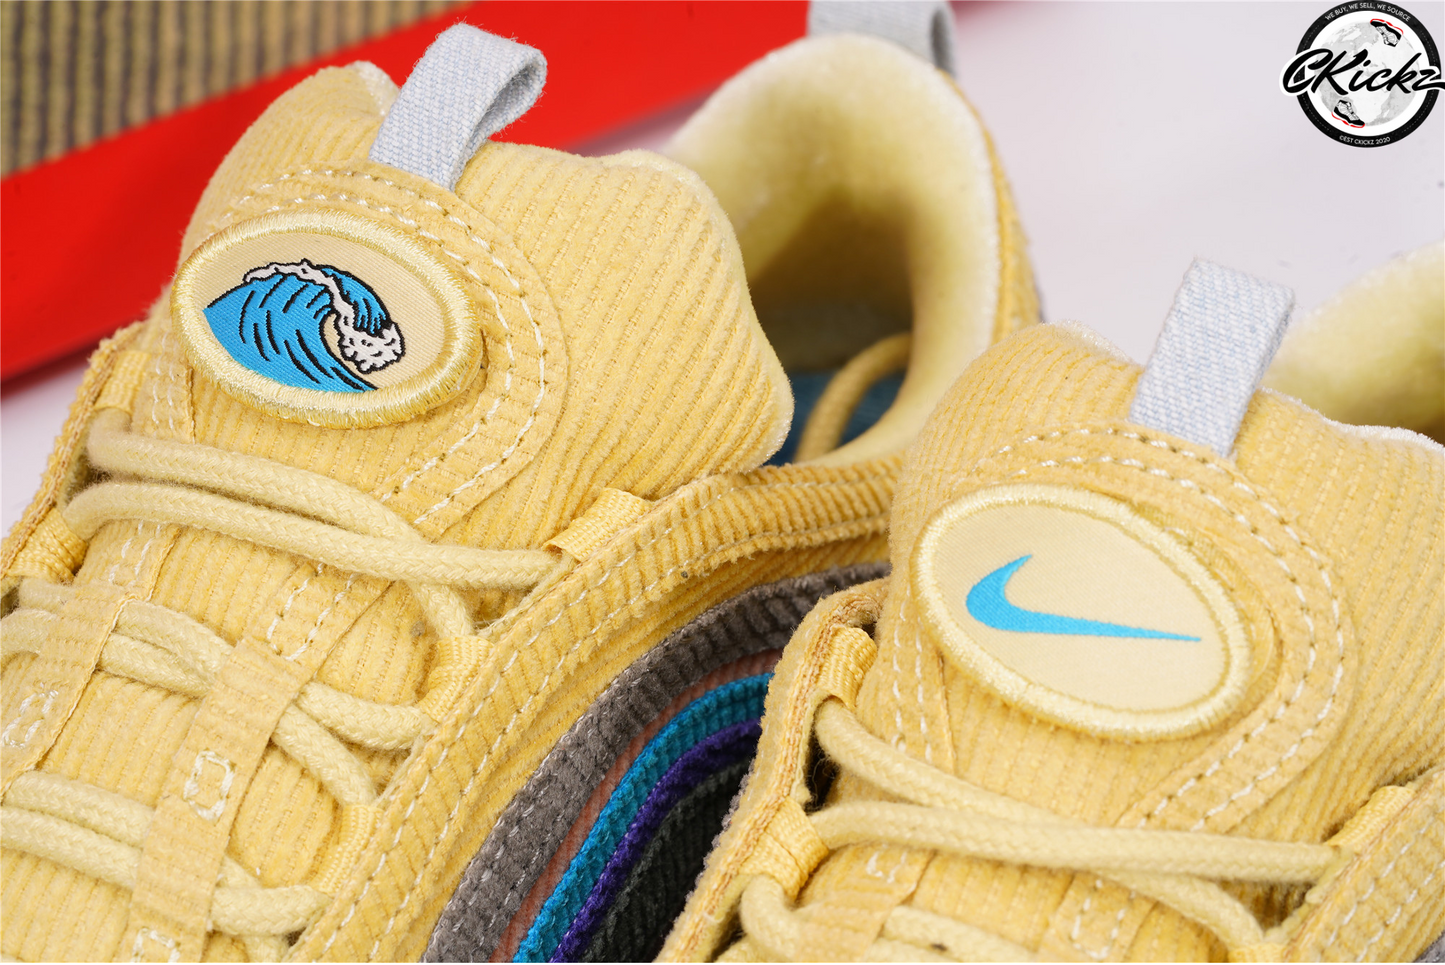 AM 1-97 x Sean Wotherspoon